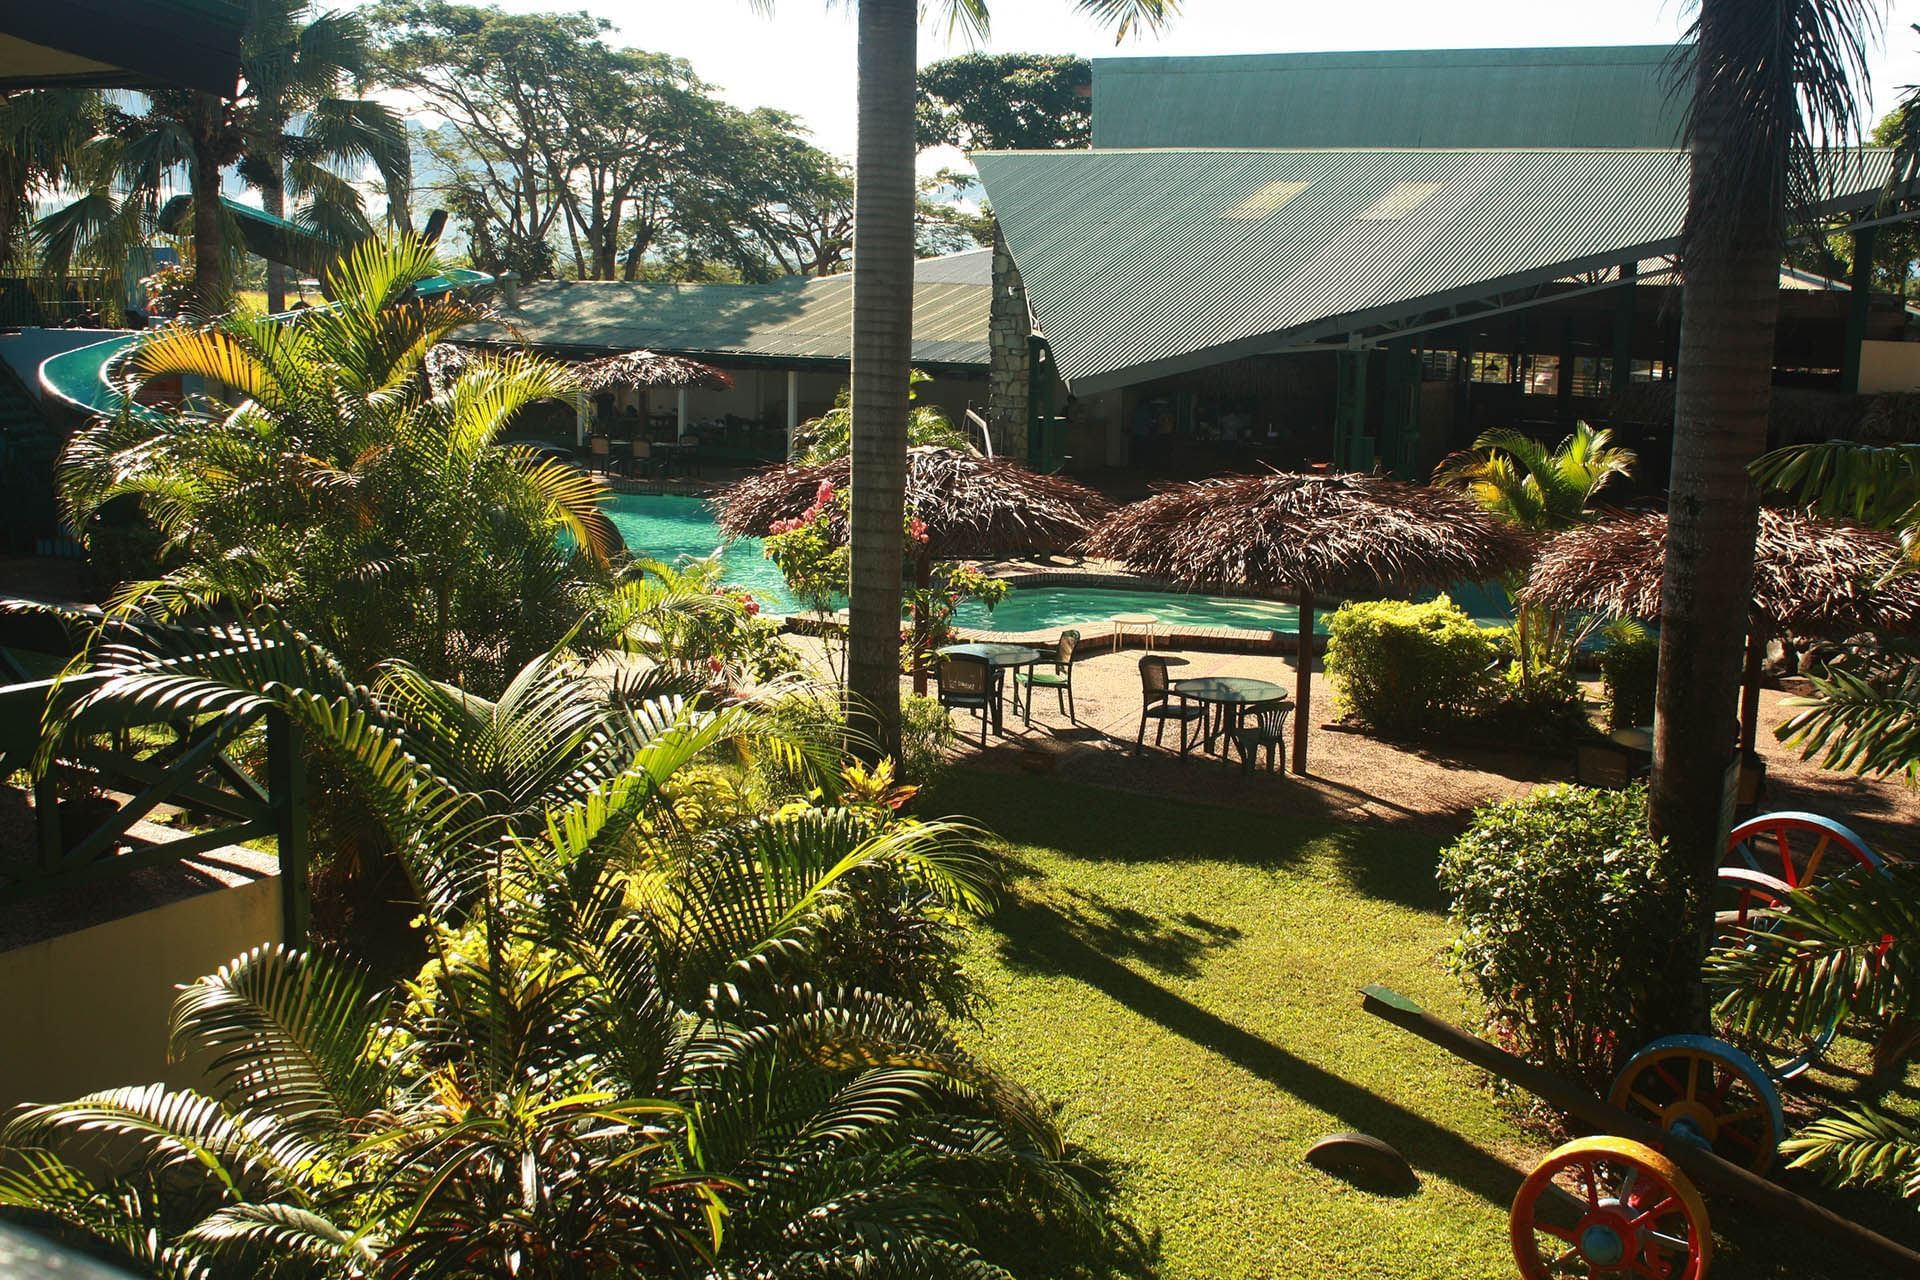 The pool surrounded by the garden at Tokatoka Resort